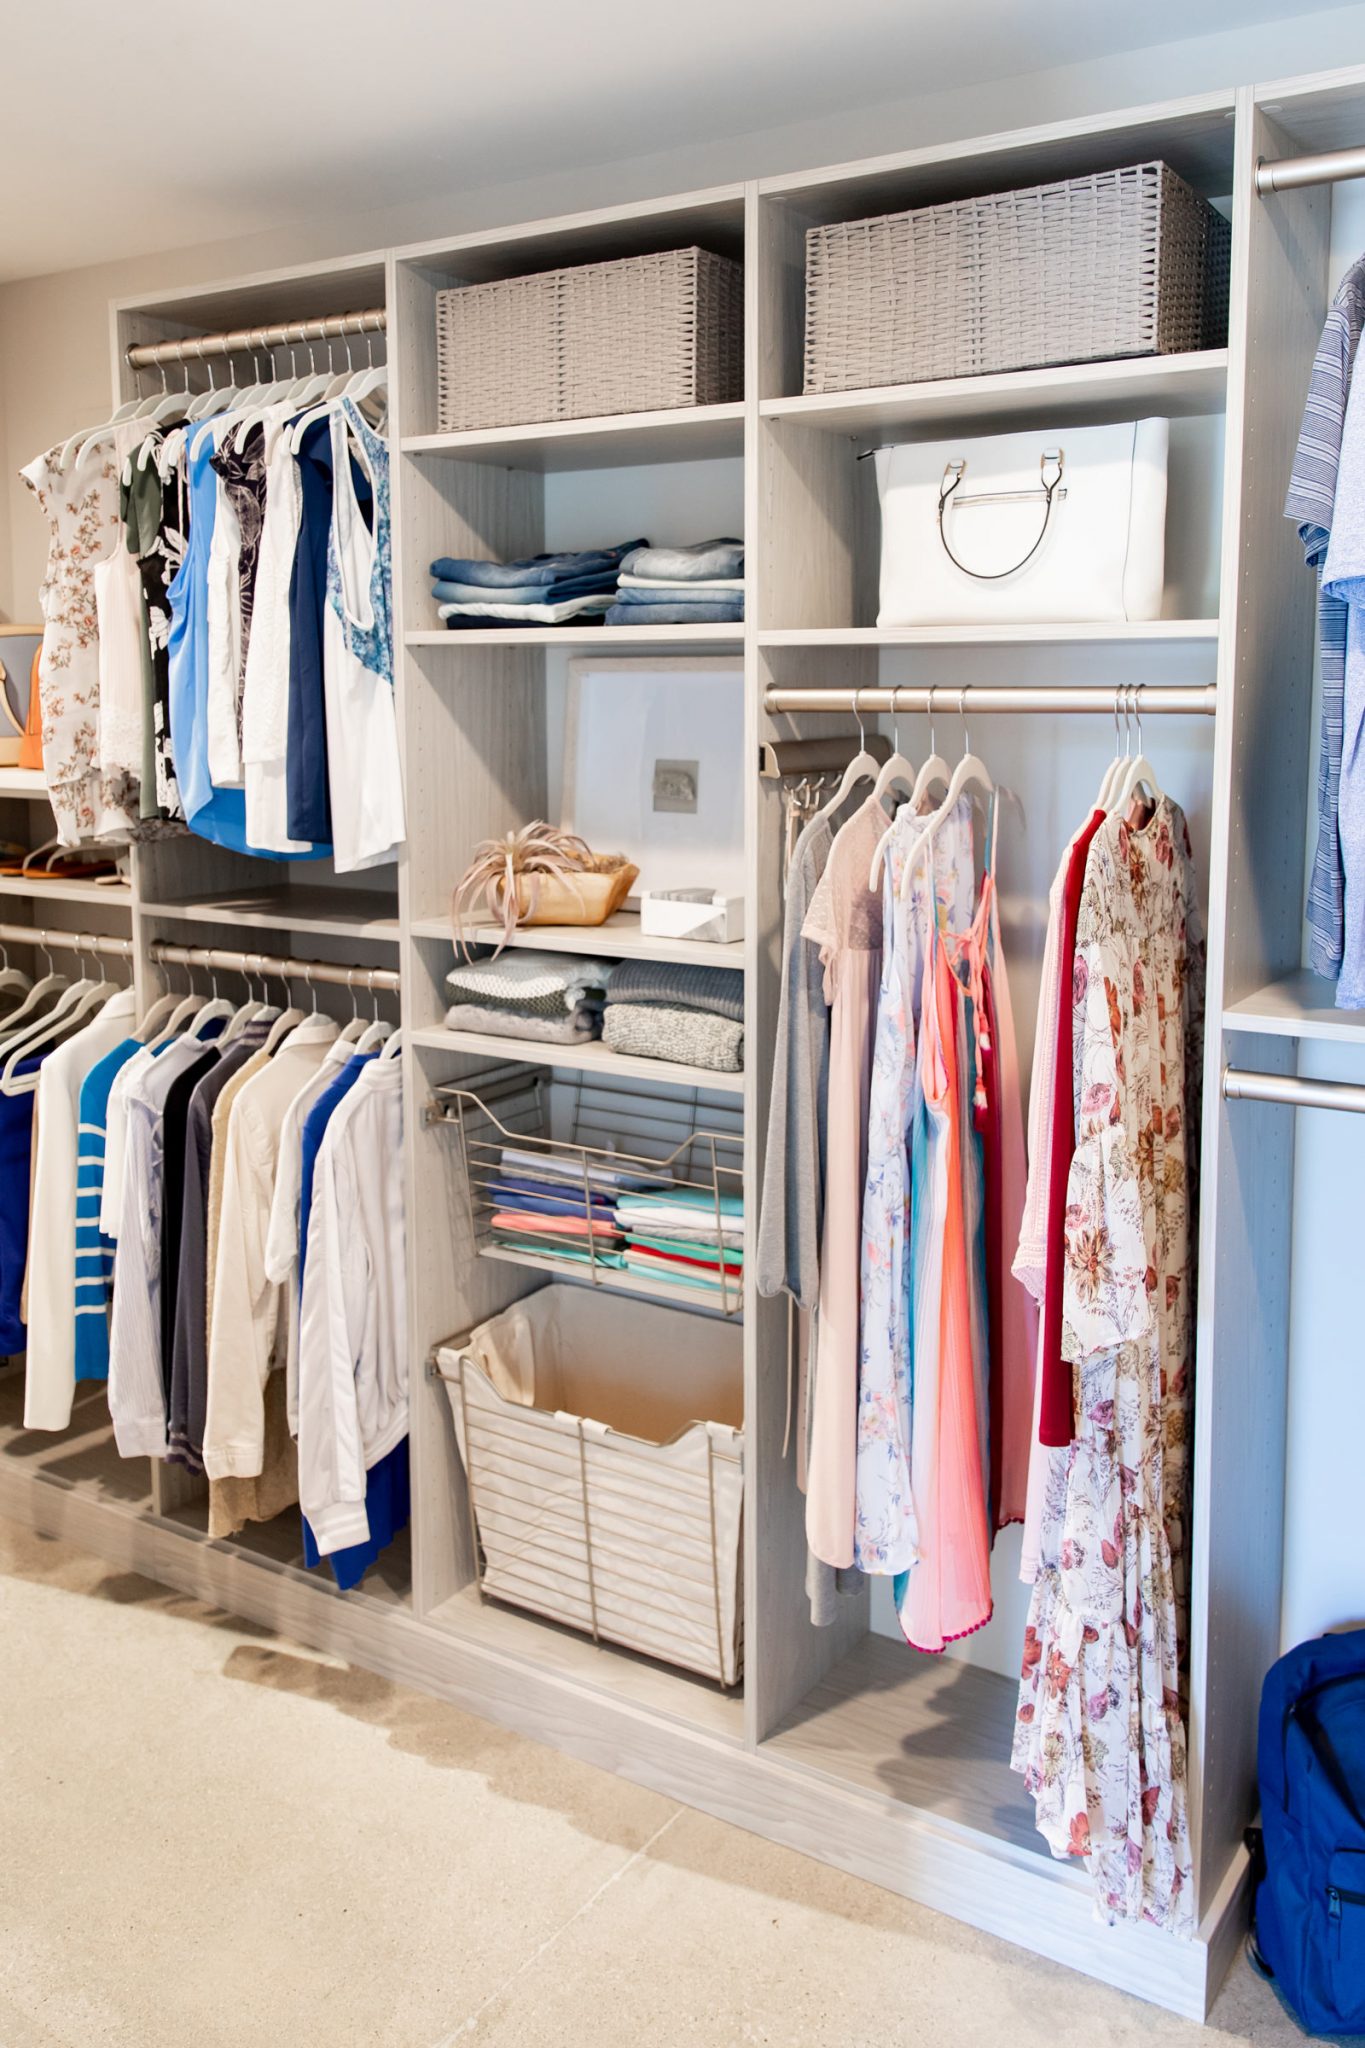 The Ultimate Plan for My Dream Walk-In Closet Design - Style Charade